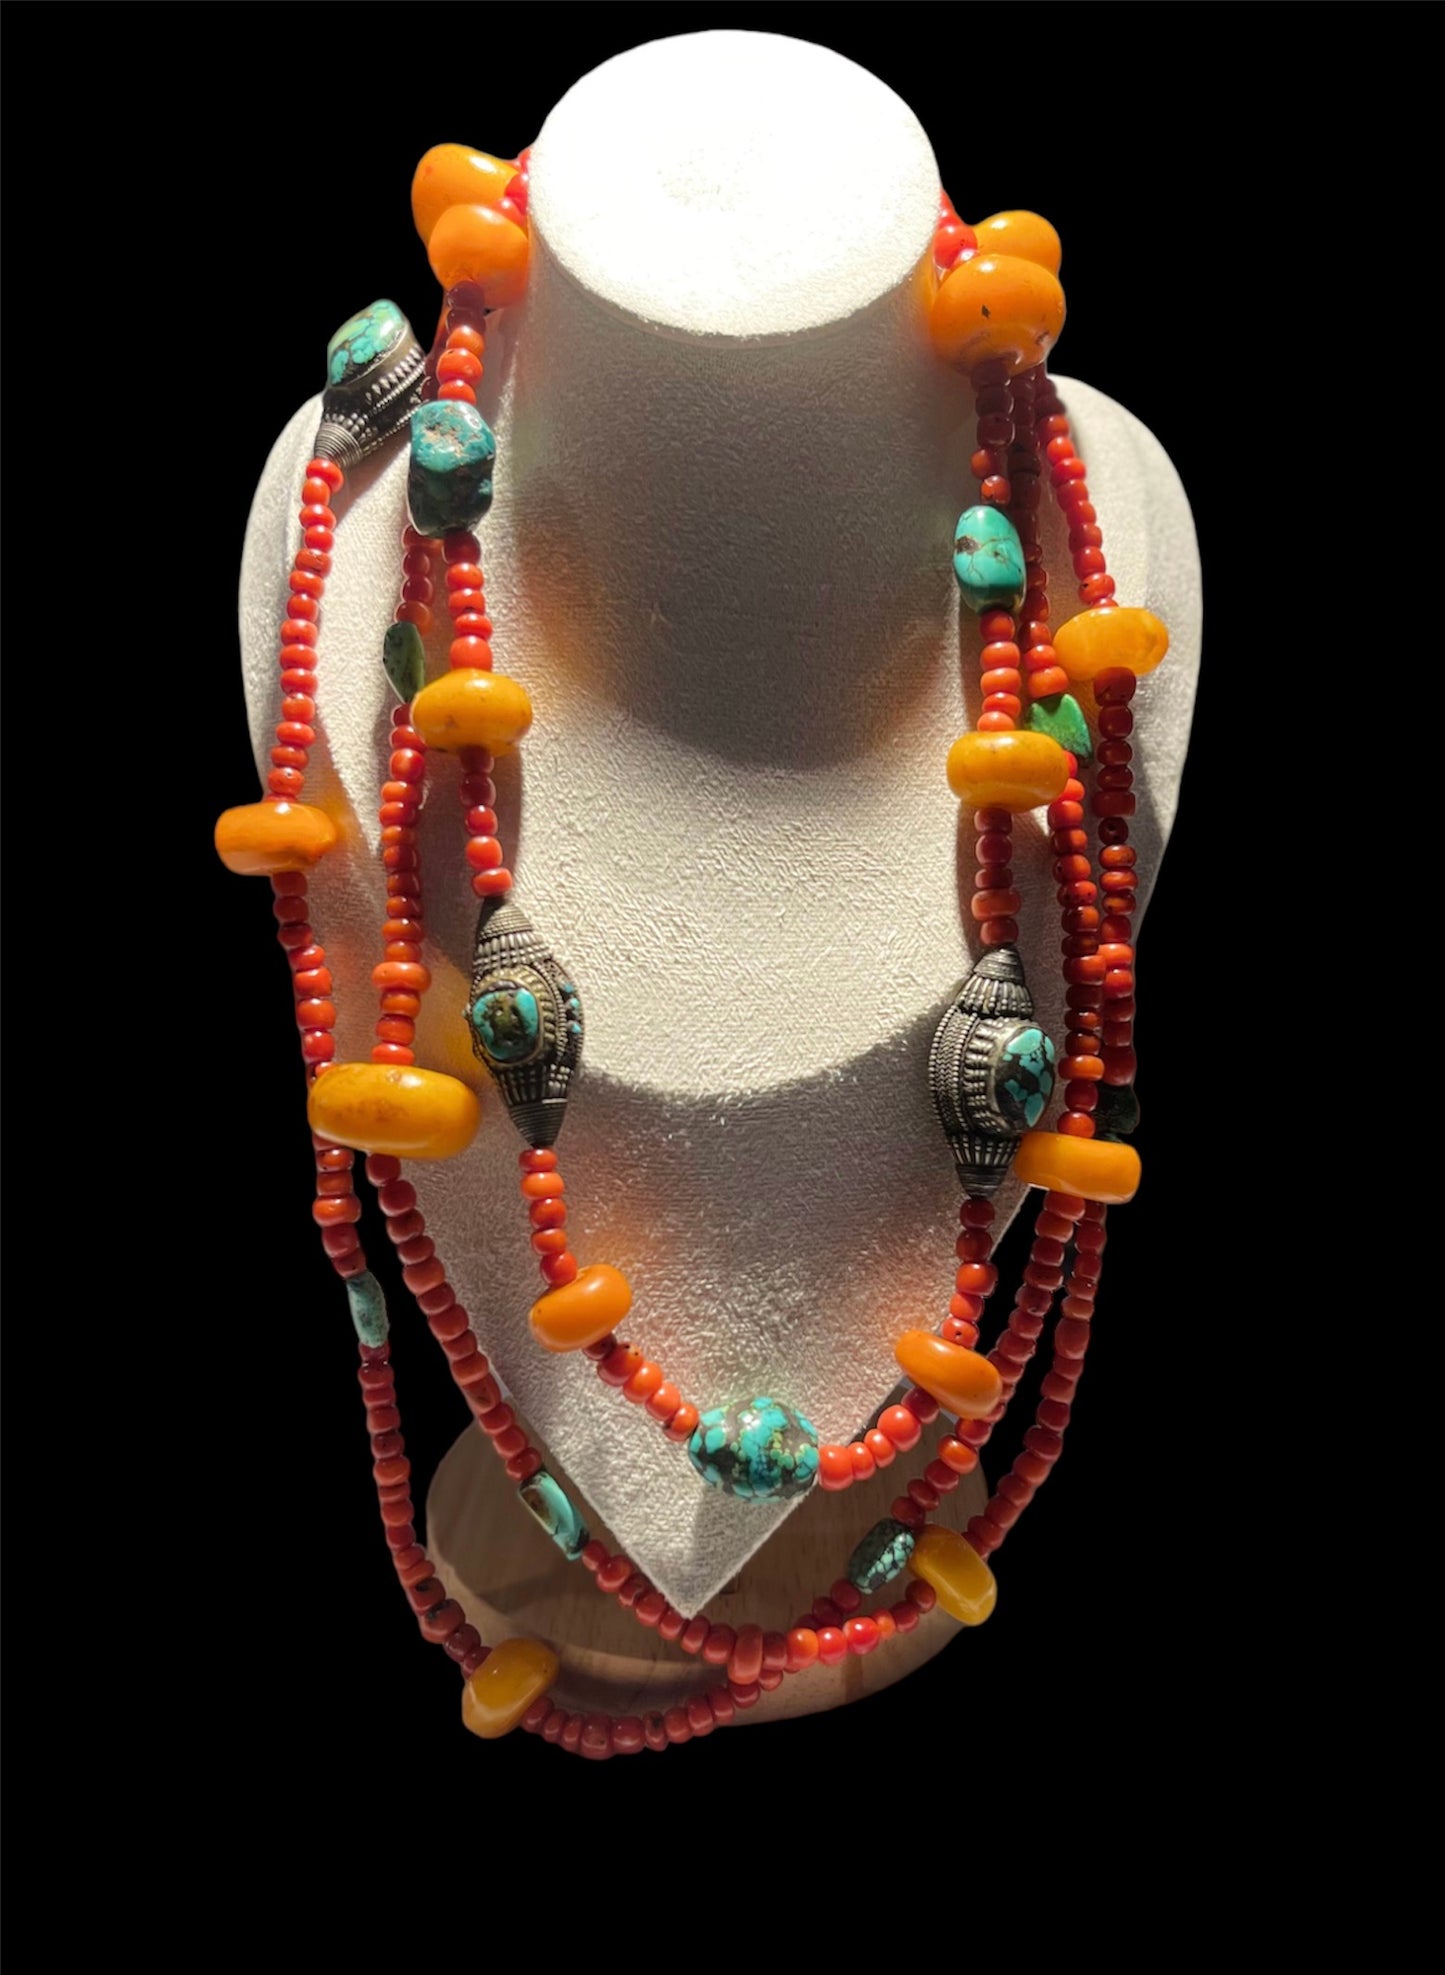 A traditional Tibetan necklace with antique Tibetan beads